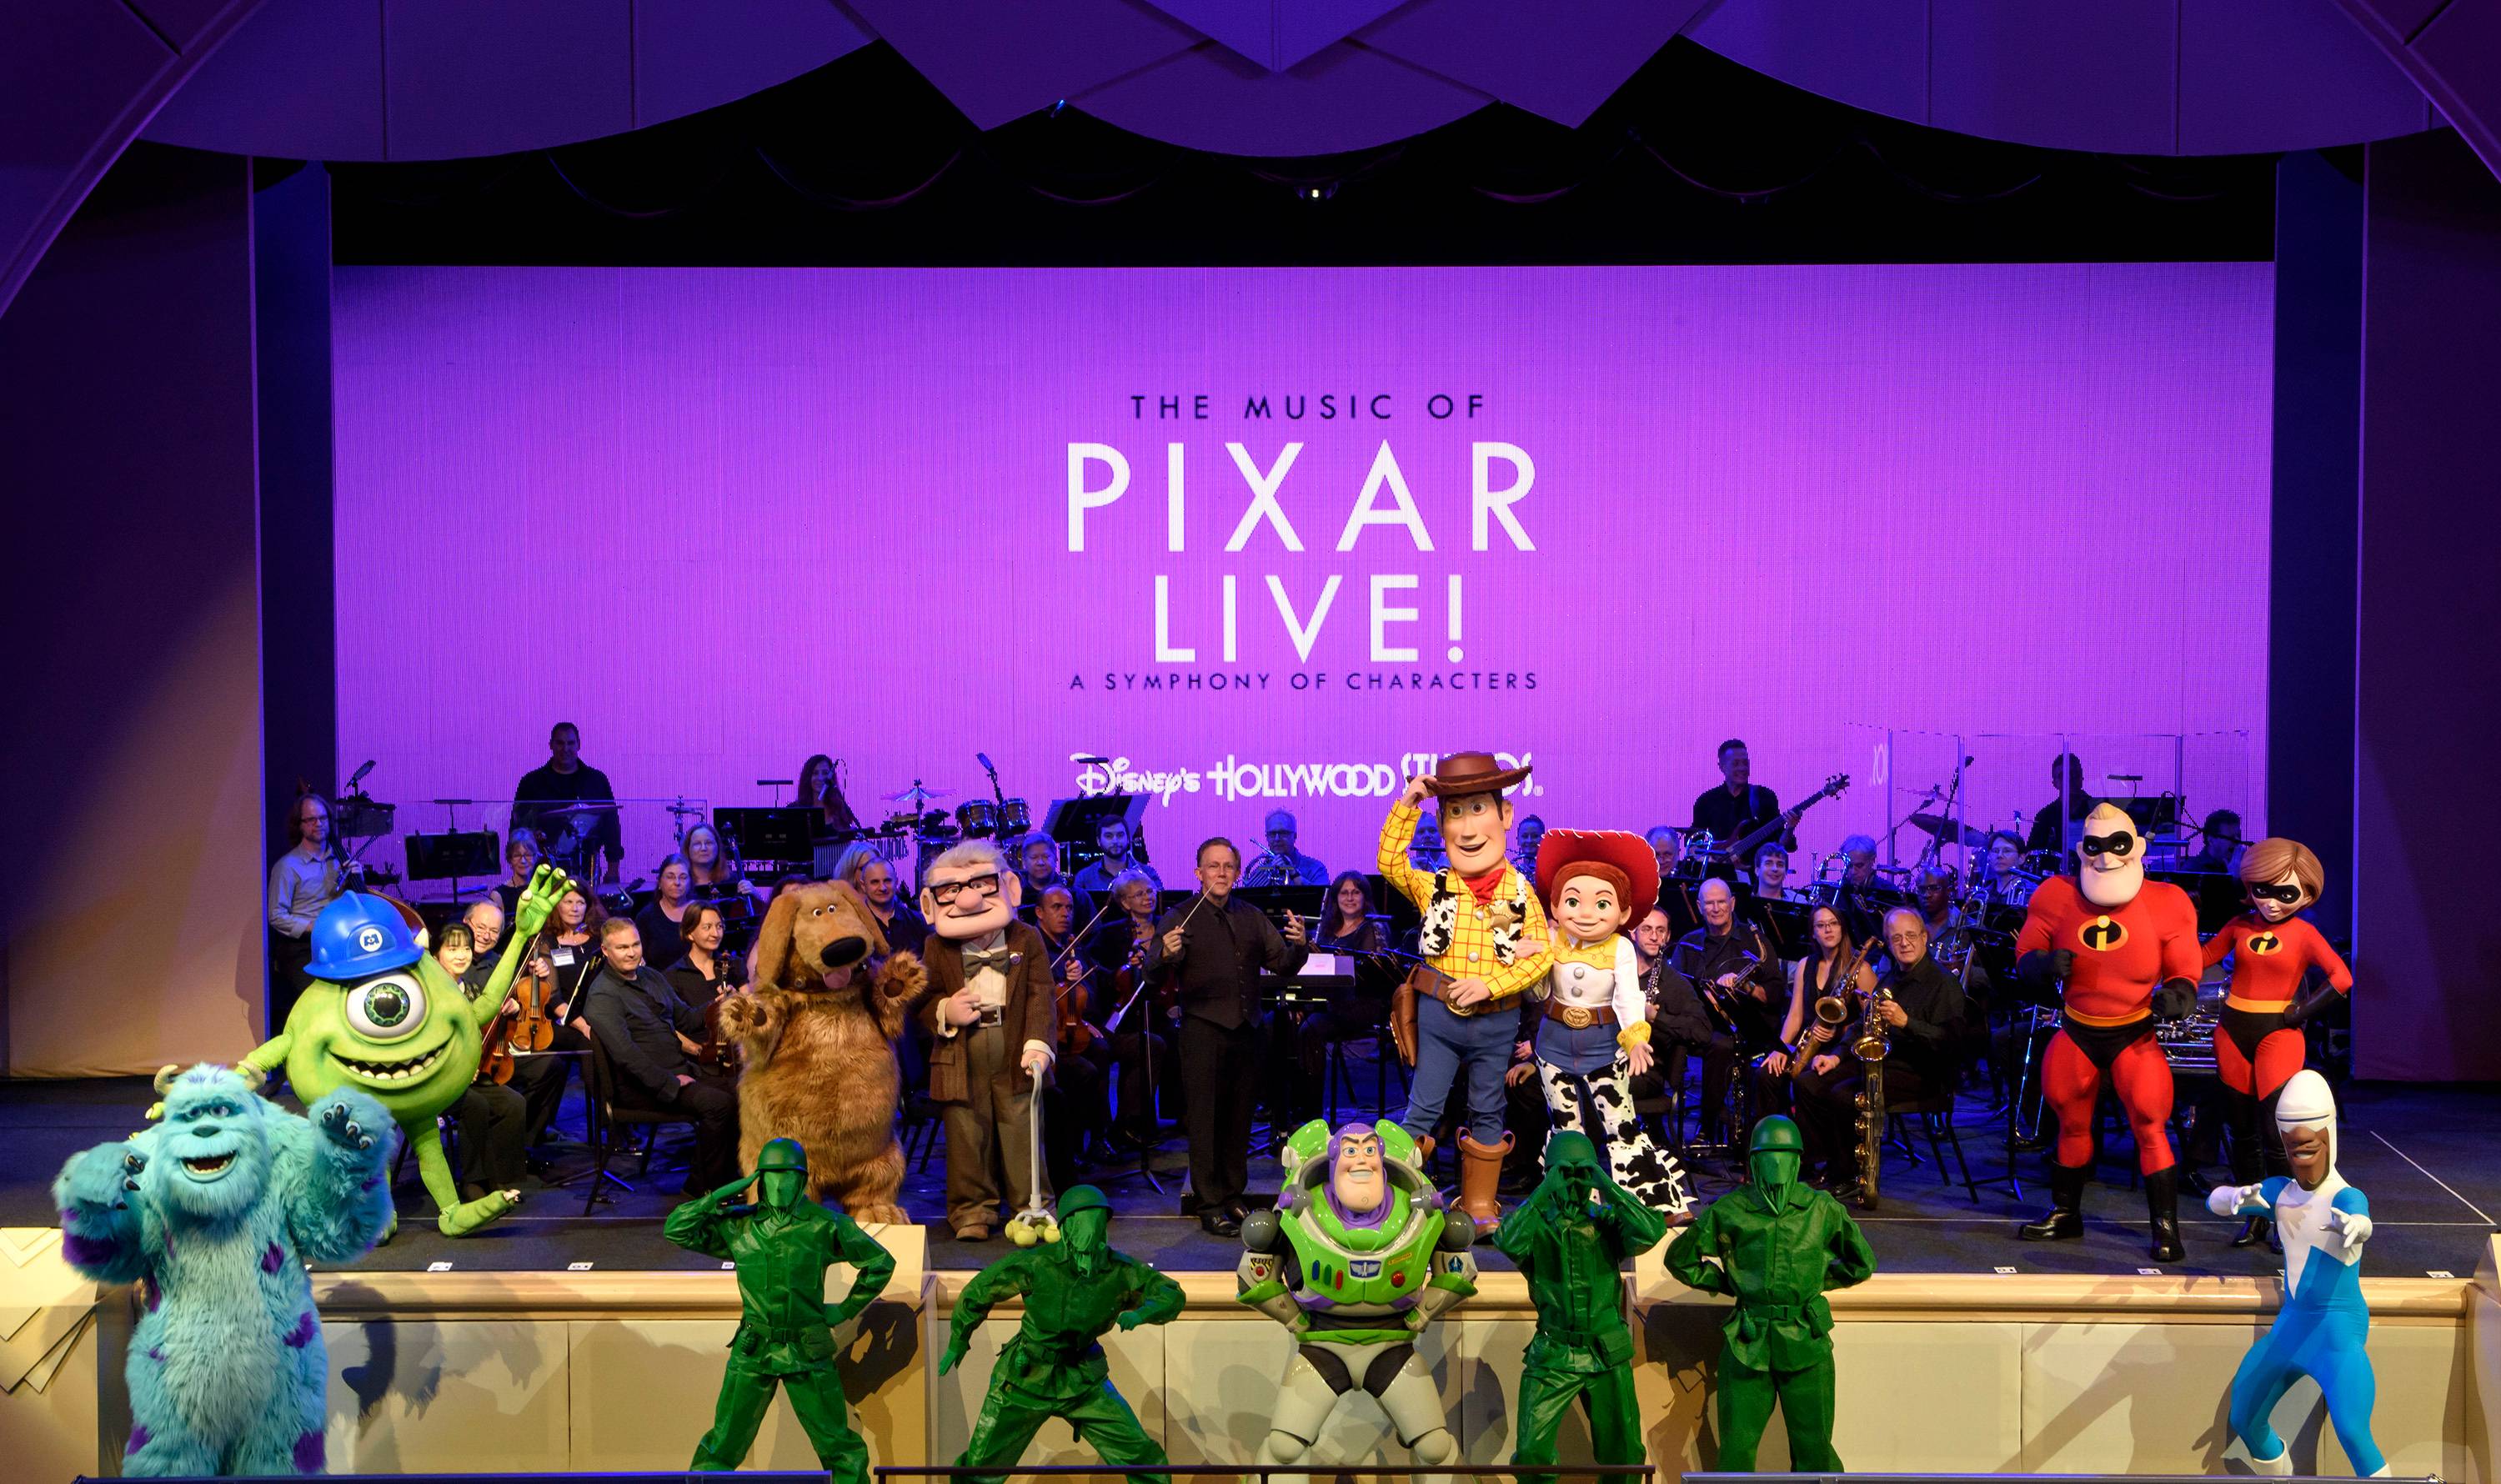 VIDEO - A look at The Music of Pixar Live! at Disney's Hollywood Studios